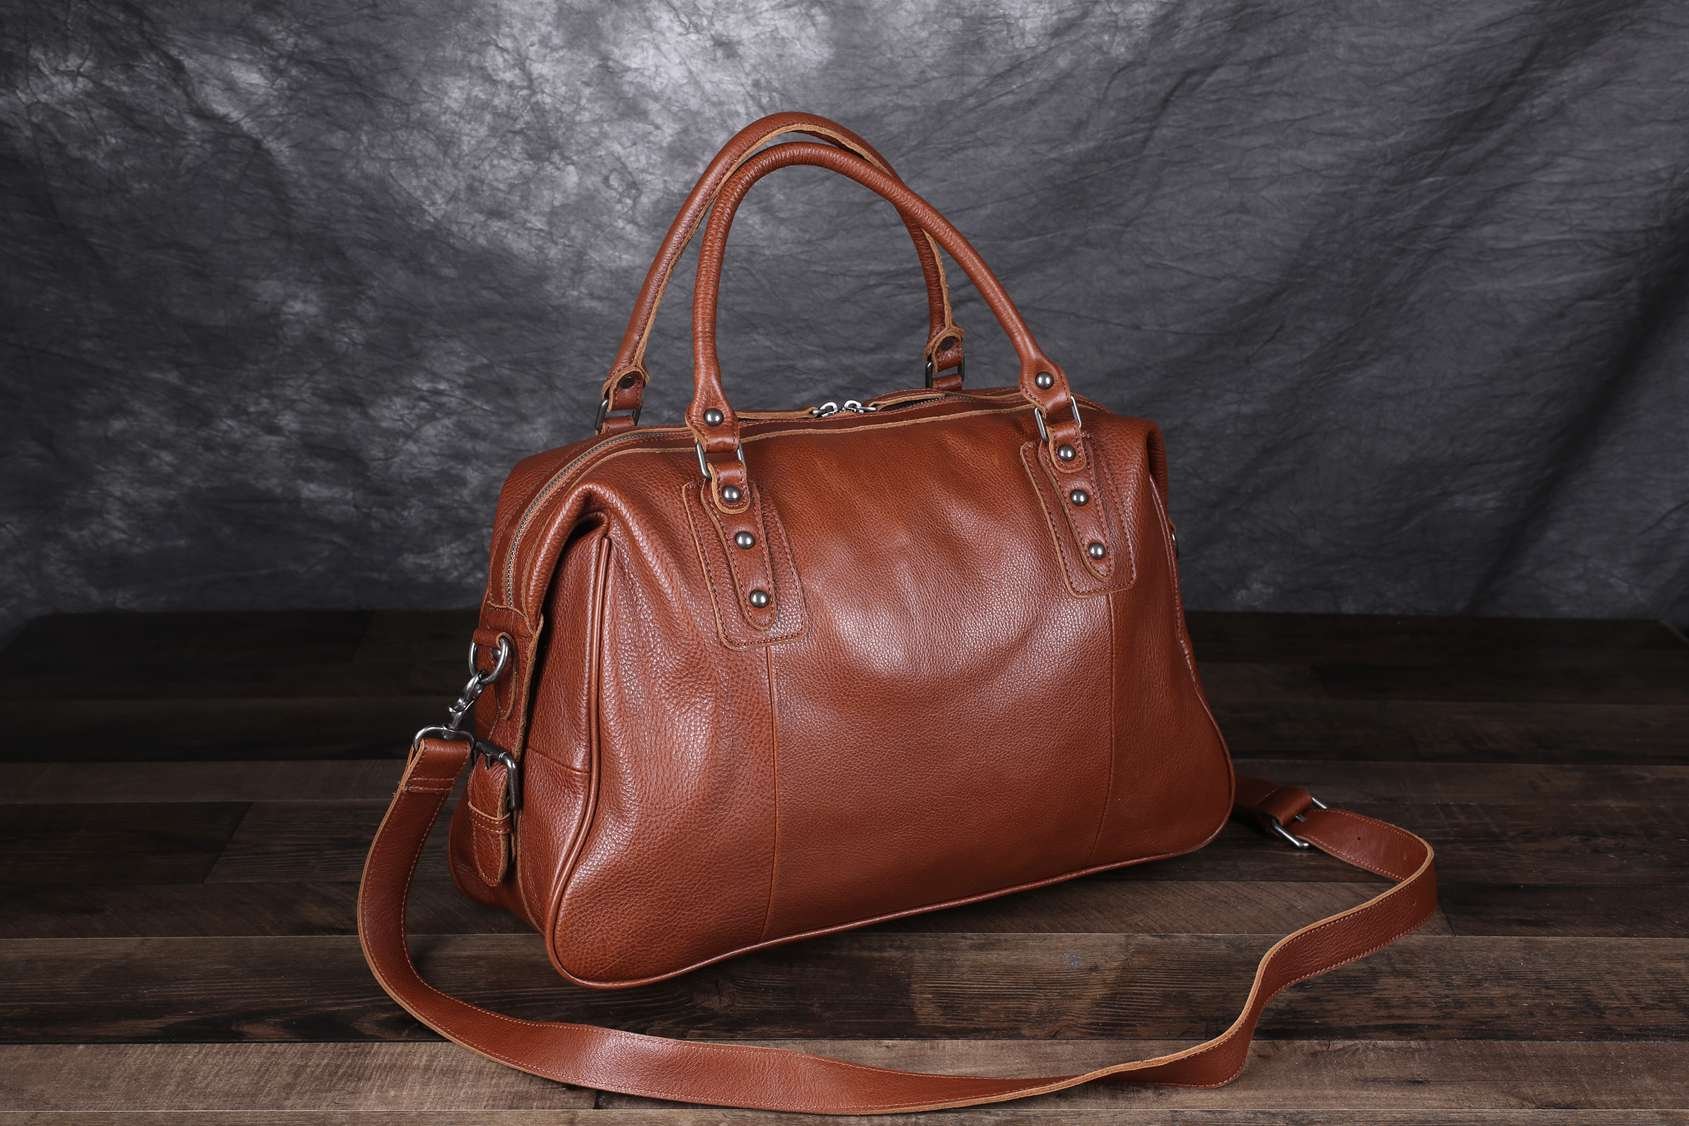 Vintage Style Vegetable Tanned Leather Travel Bag, Duffle Bag ...